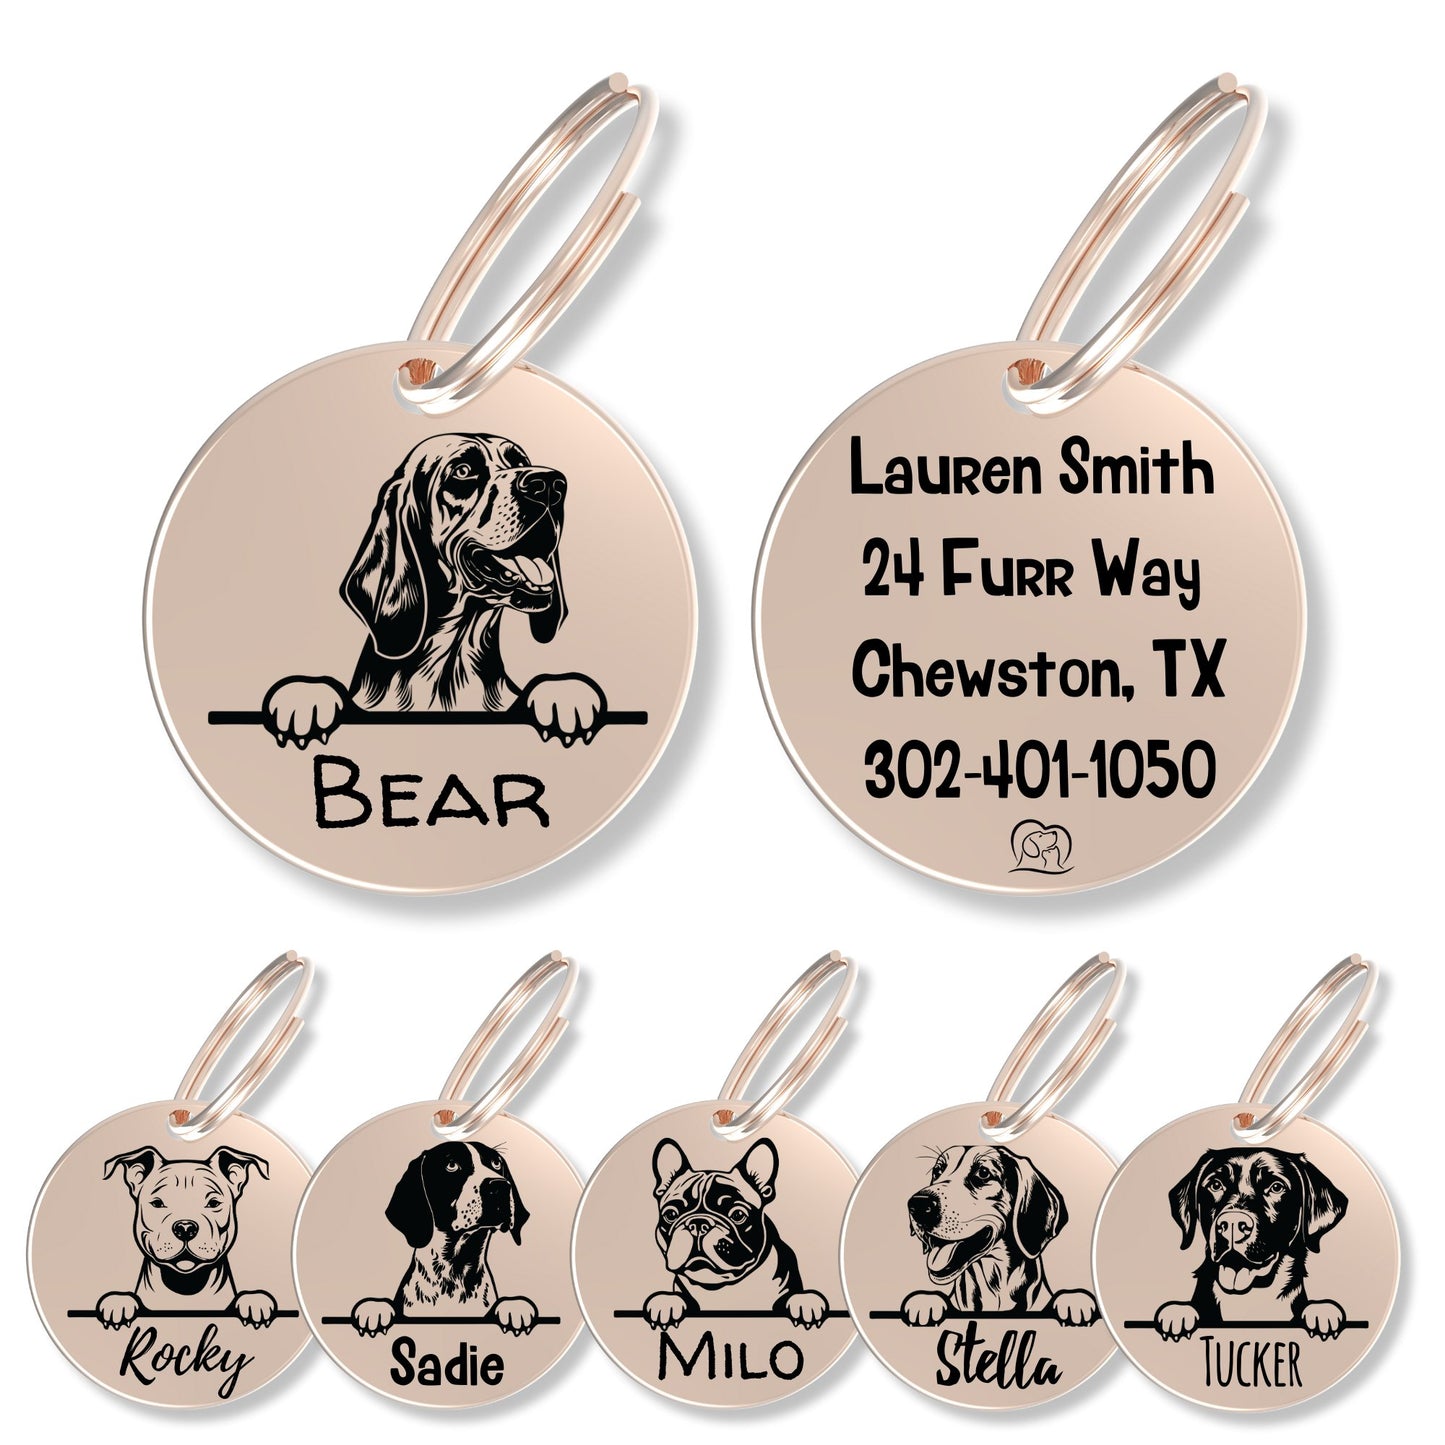 Breed Dog Tag - Personalized Breed Dog Tag (Bloodhound)